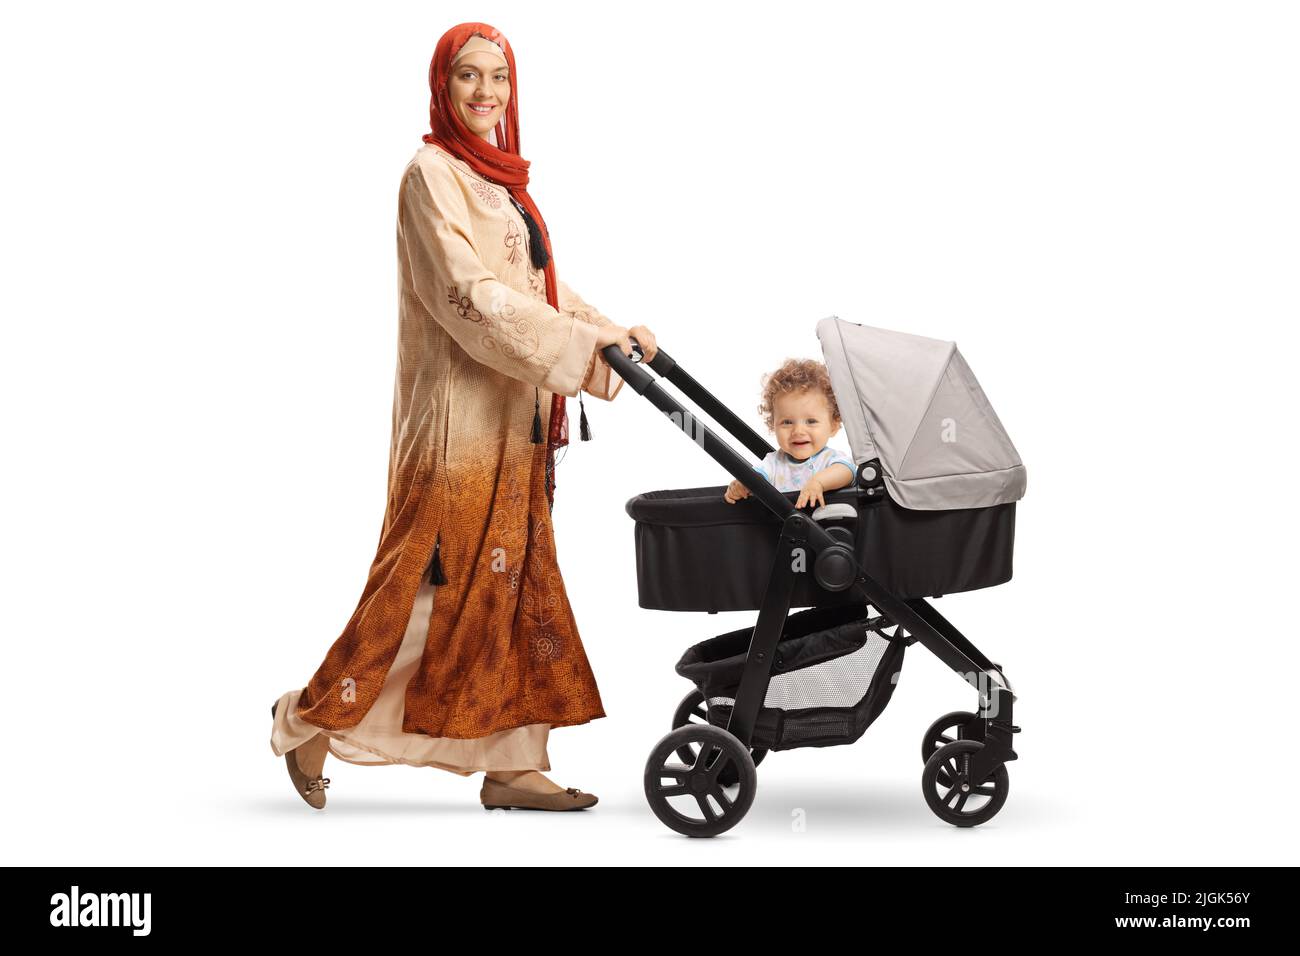 Full length shot of a young mother in ethnic clothes with hijab pushing a baby boy in a stroller isolated on white background Stock Photo